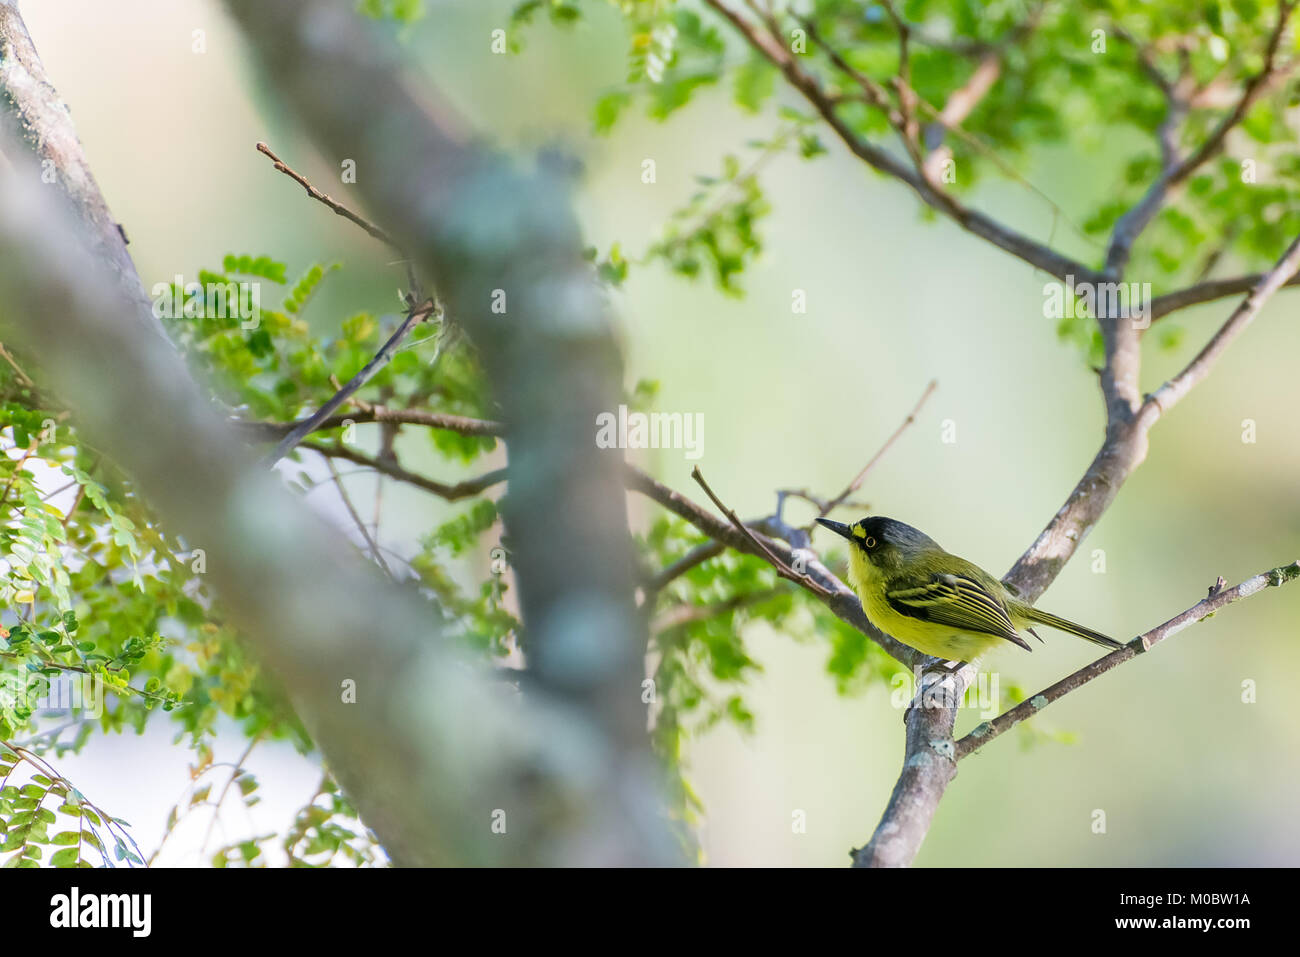 Close up of yellow-lored tody-flycatcher passerine bird perched in nature Stock Photo